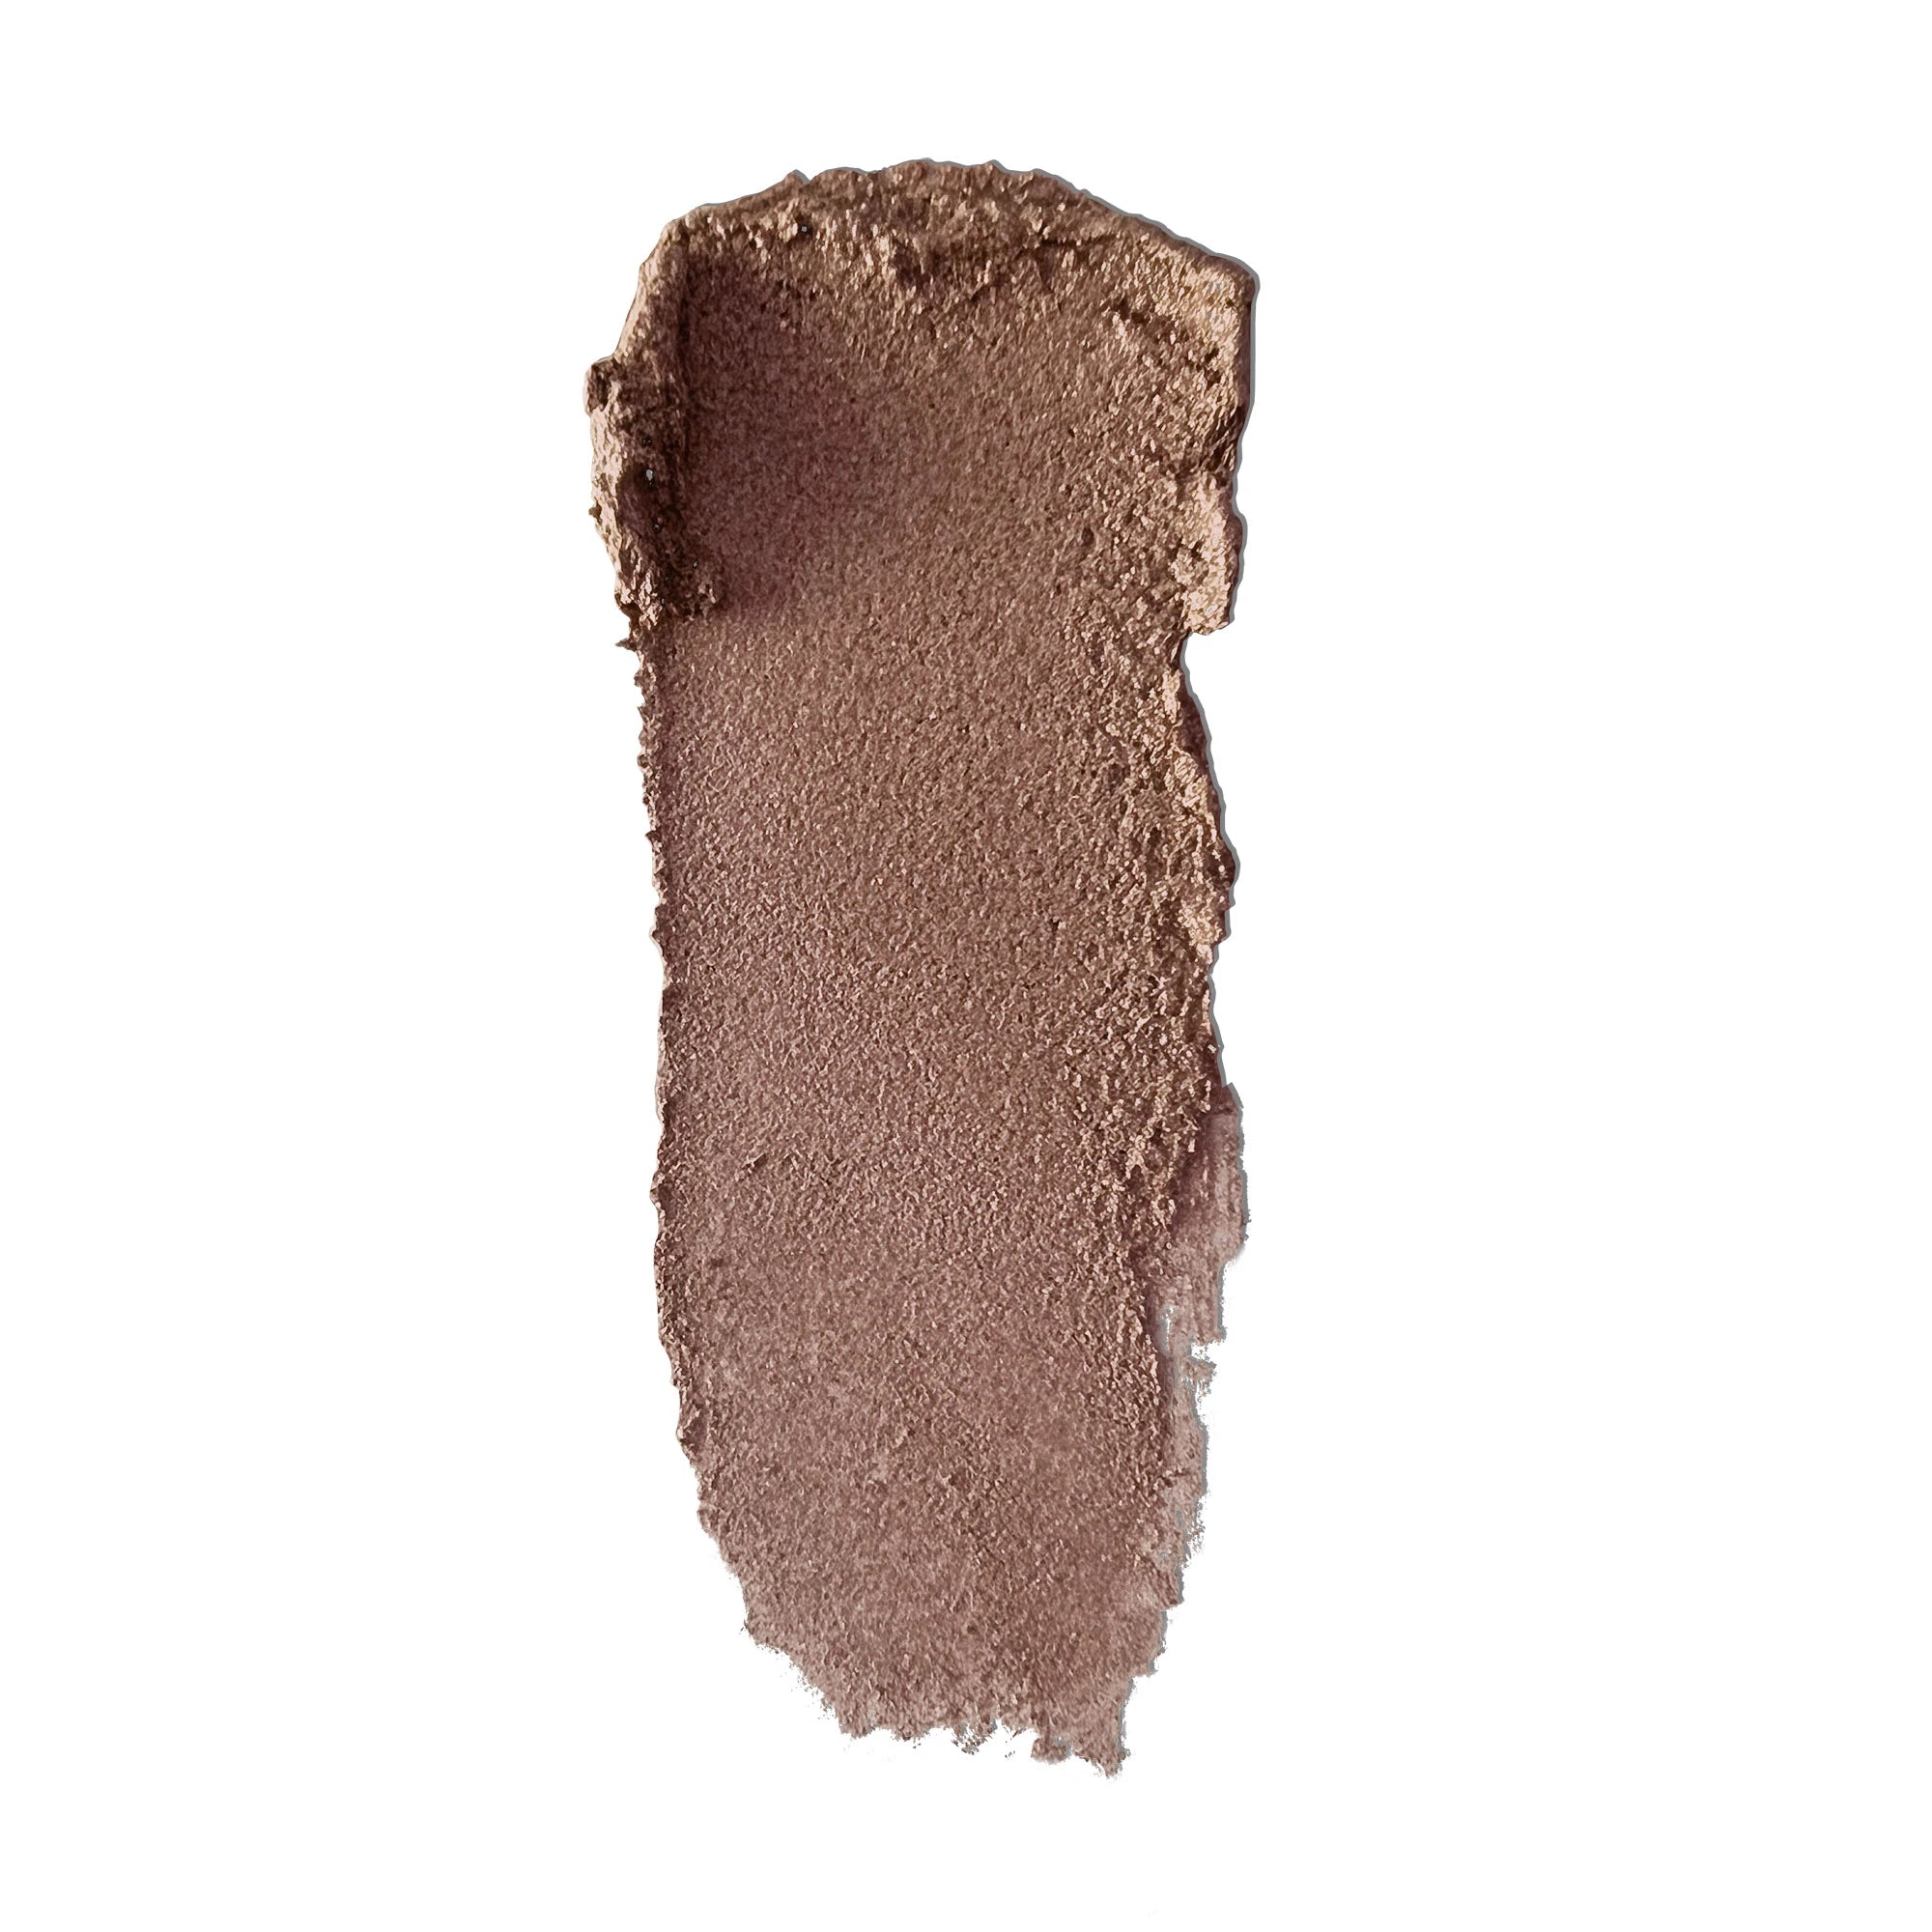 Selected: PAINT IT UP Pogo 24HR Cream Eyeshadow